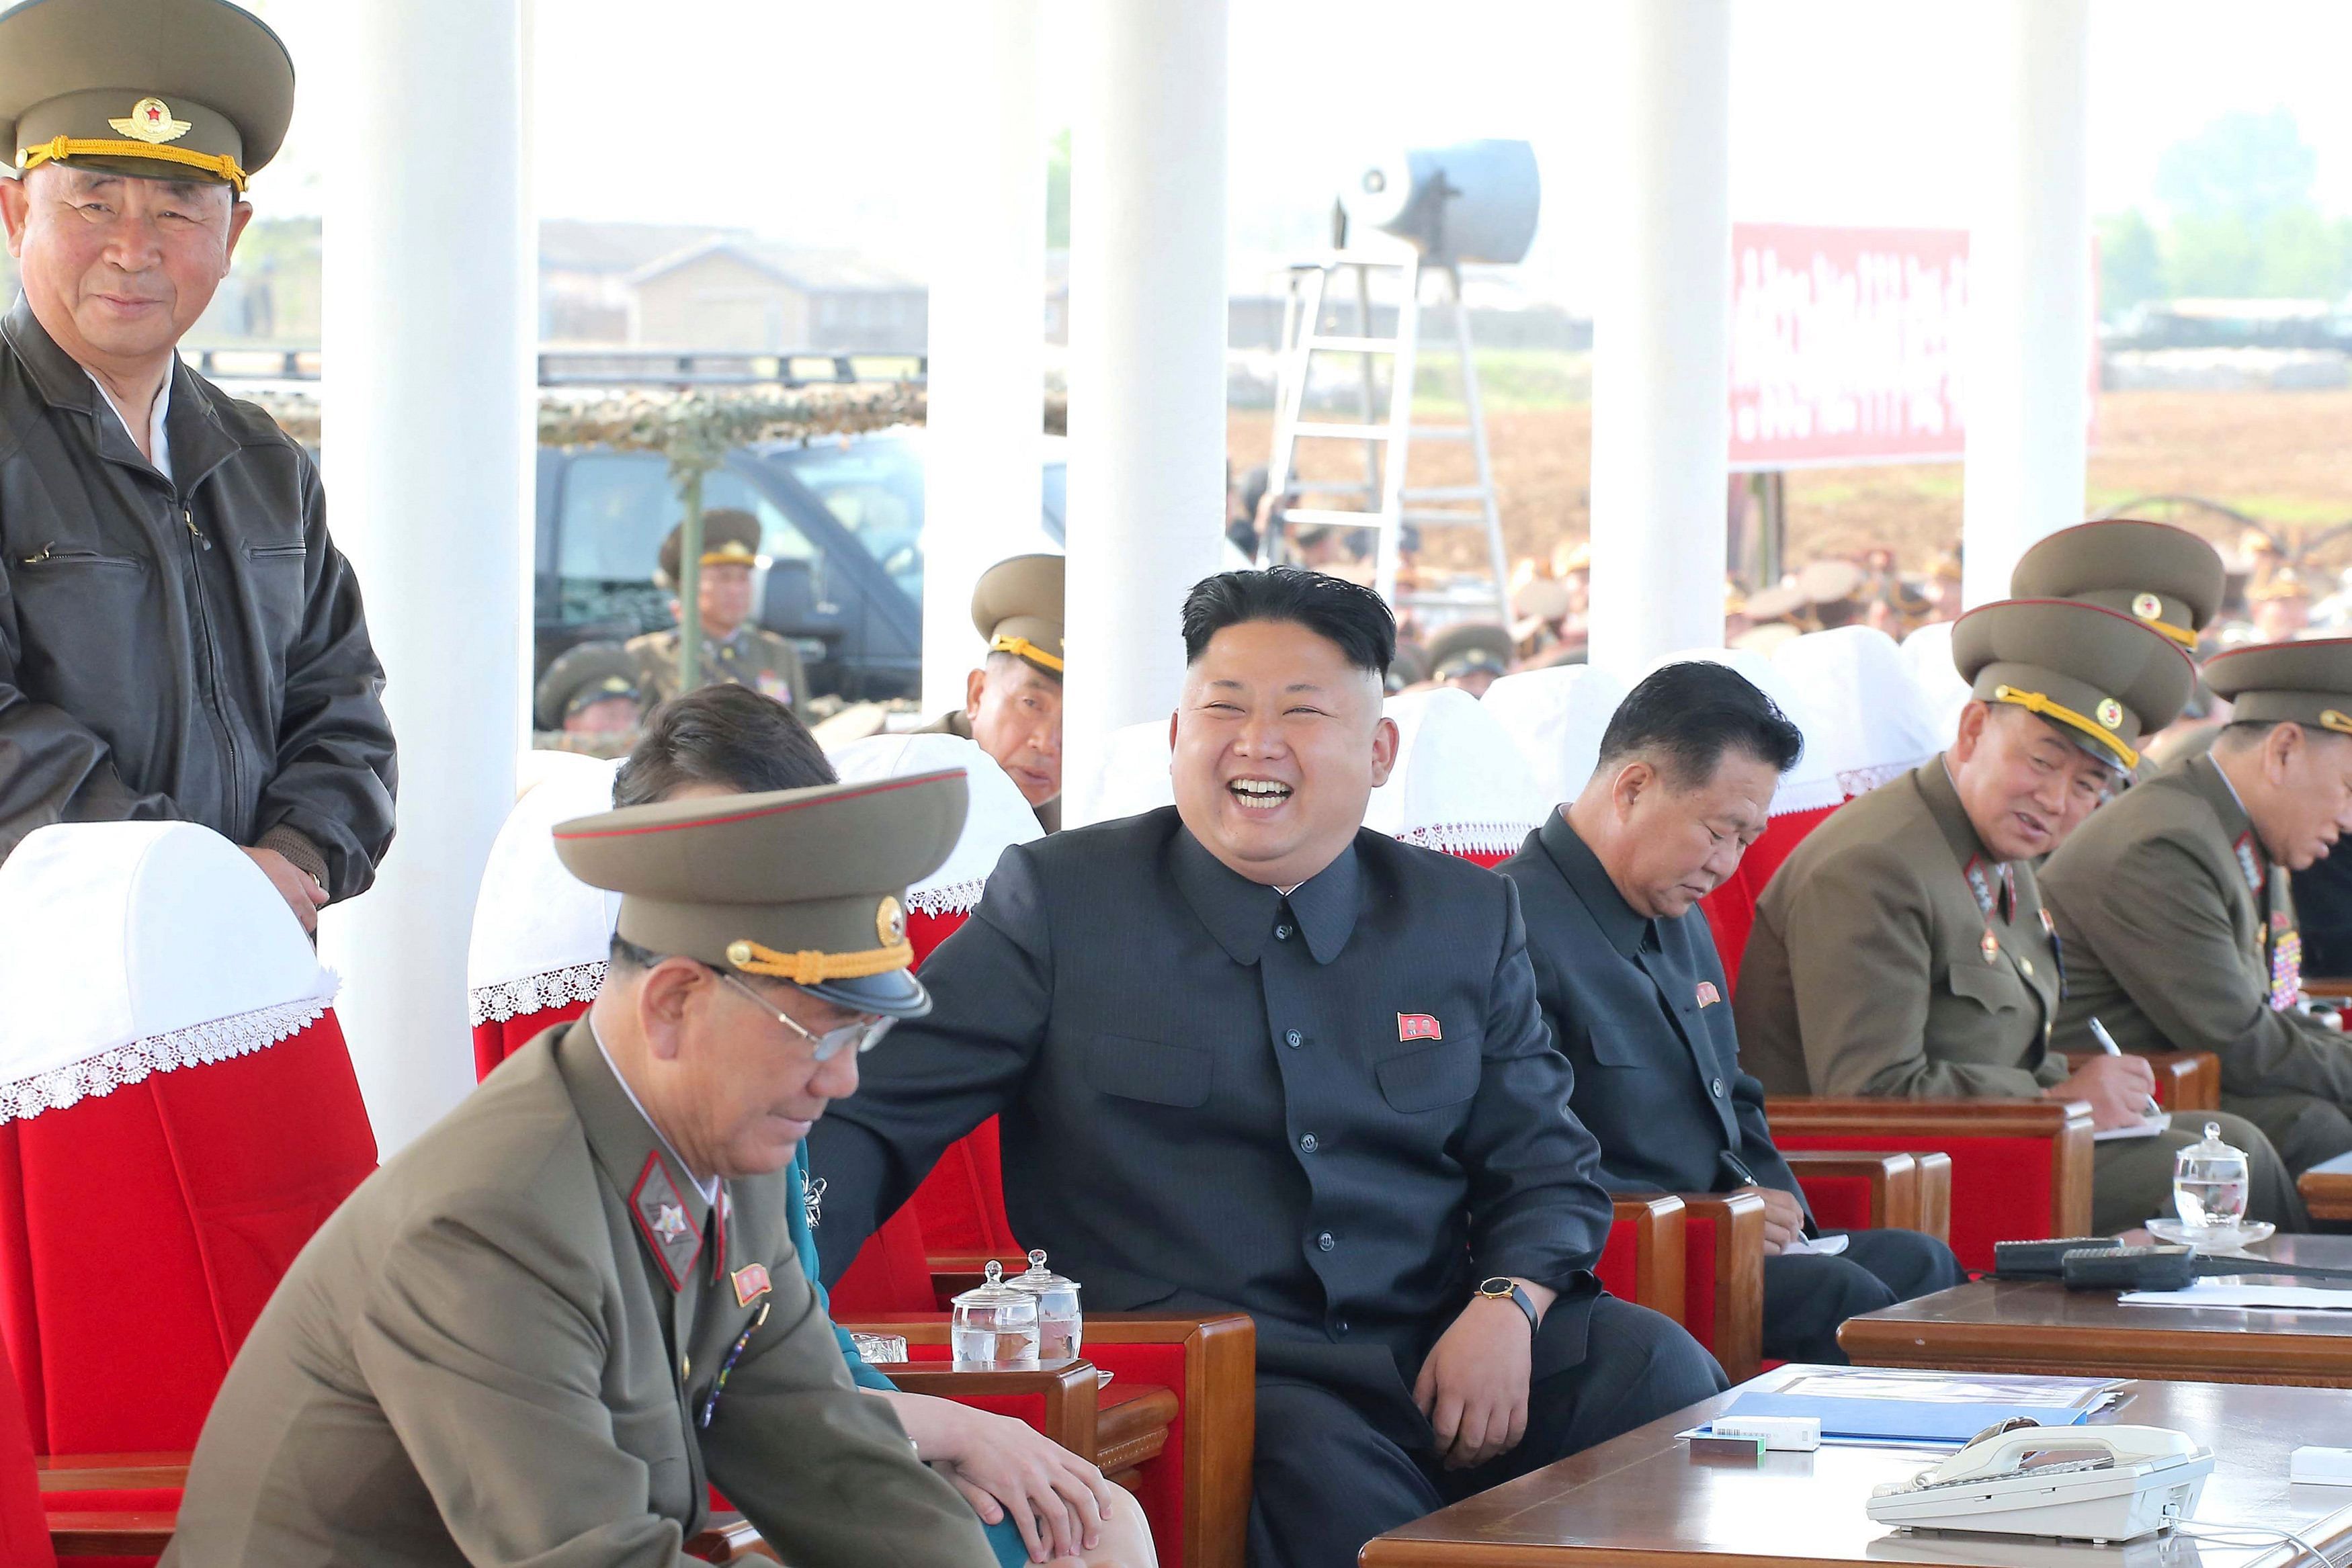 Vice Marshall Hwang Pyong So (bottom L), in full Korean People’s Army uniform, watches an air show by the Korean People’s Air Force with North Korean leader Kim Jong Un (C) on May 10, 2014 in this photo released by North Korea's Korean Central News Agency (KCNA). Photo: Reuters 